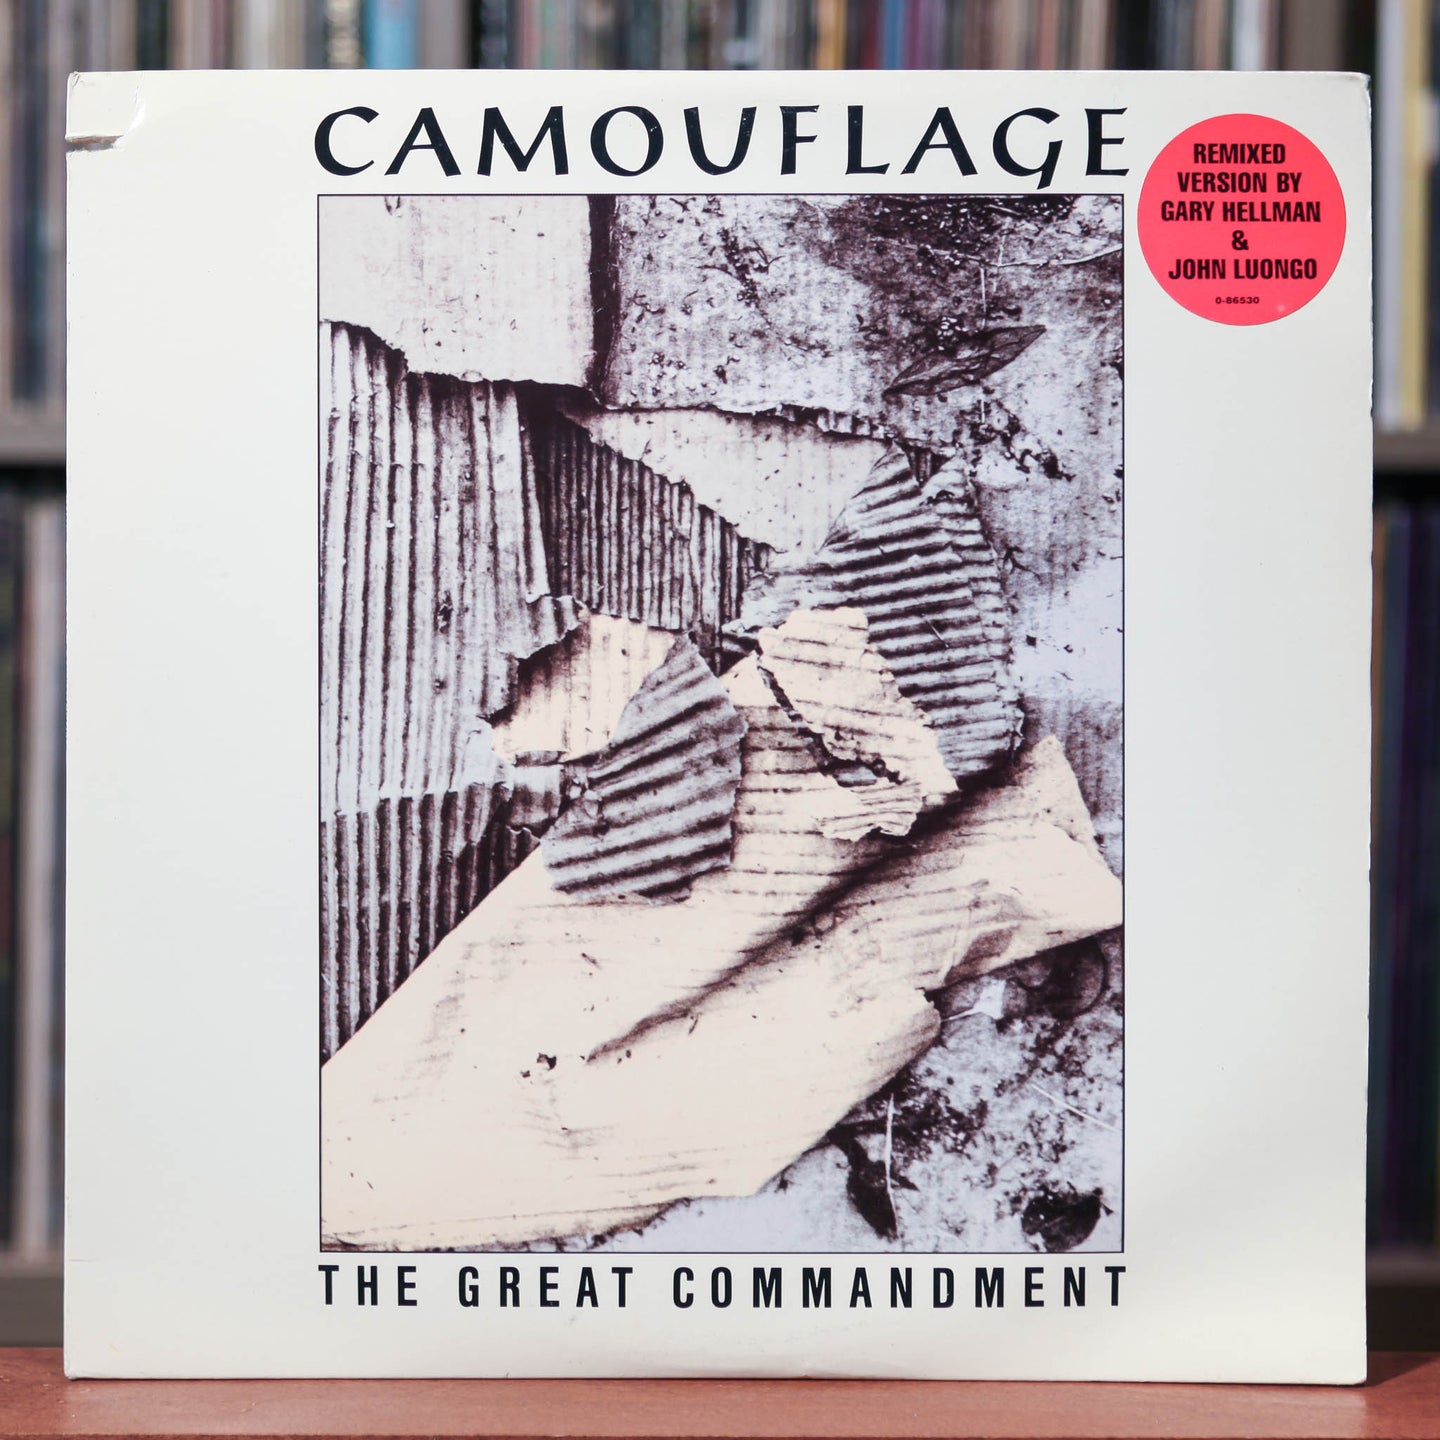 Camouflage - The Great Commandment (Remixed Version) 12